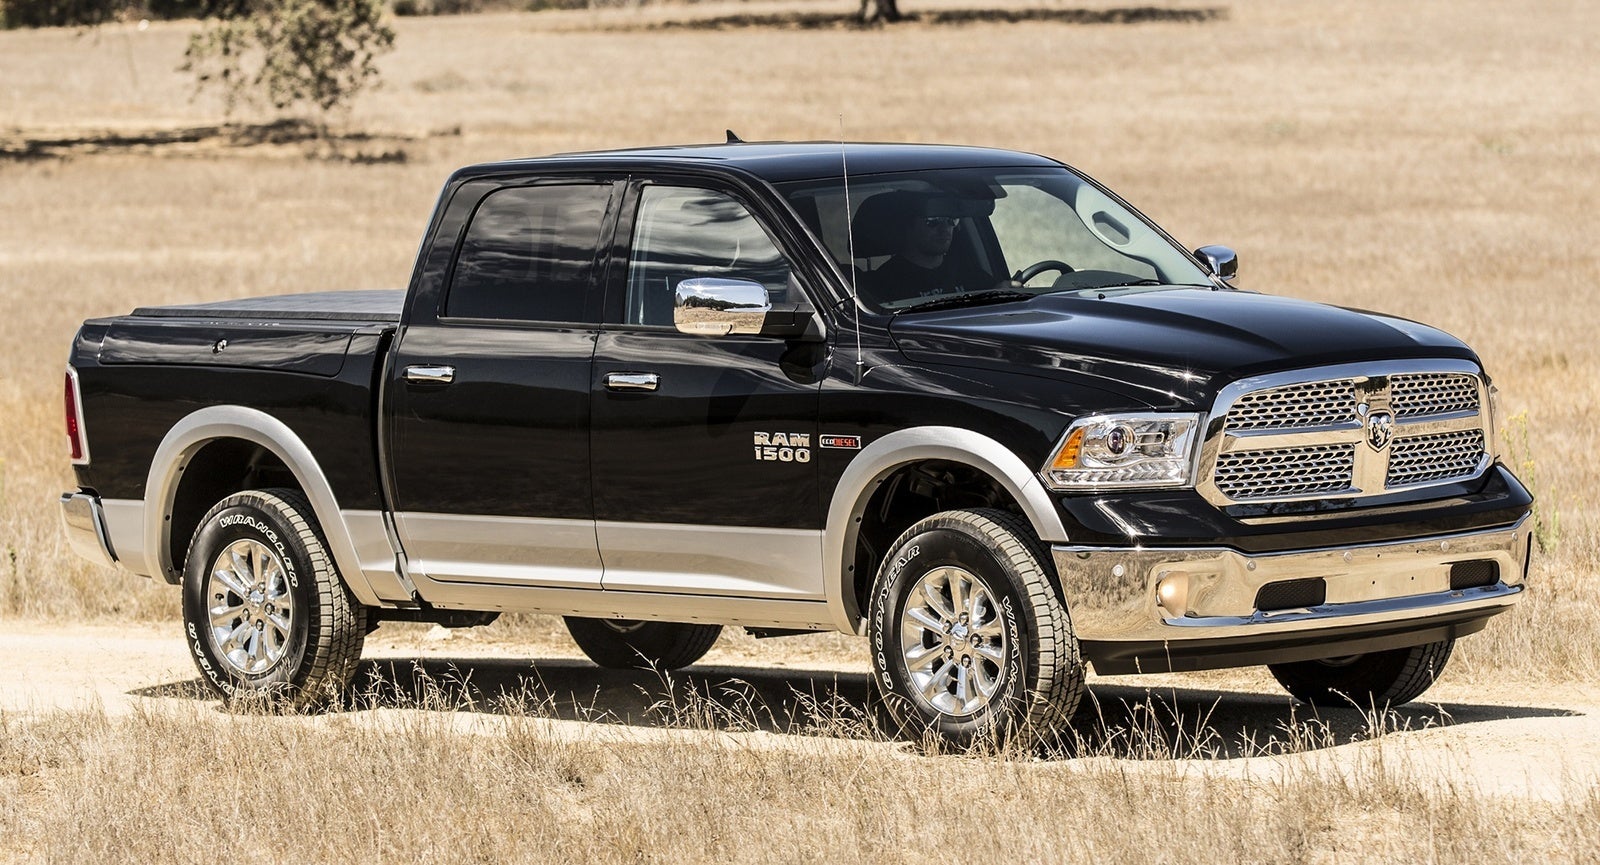 2015 / 2016 Ram 1500 for Sale in your area - CarGurus